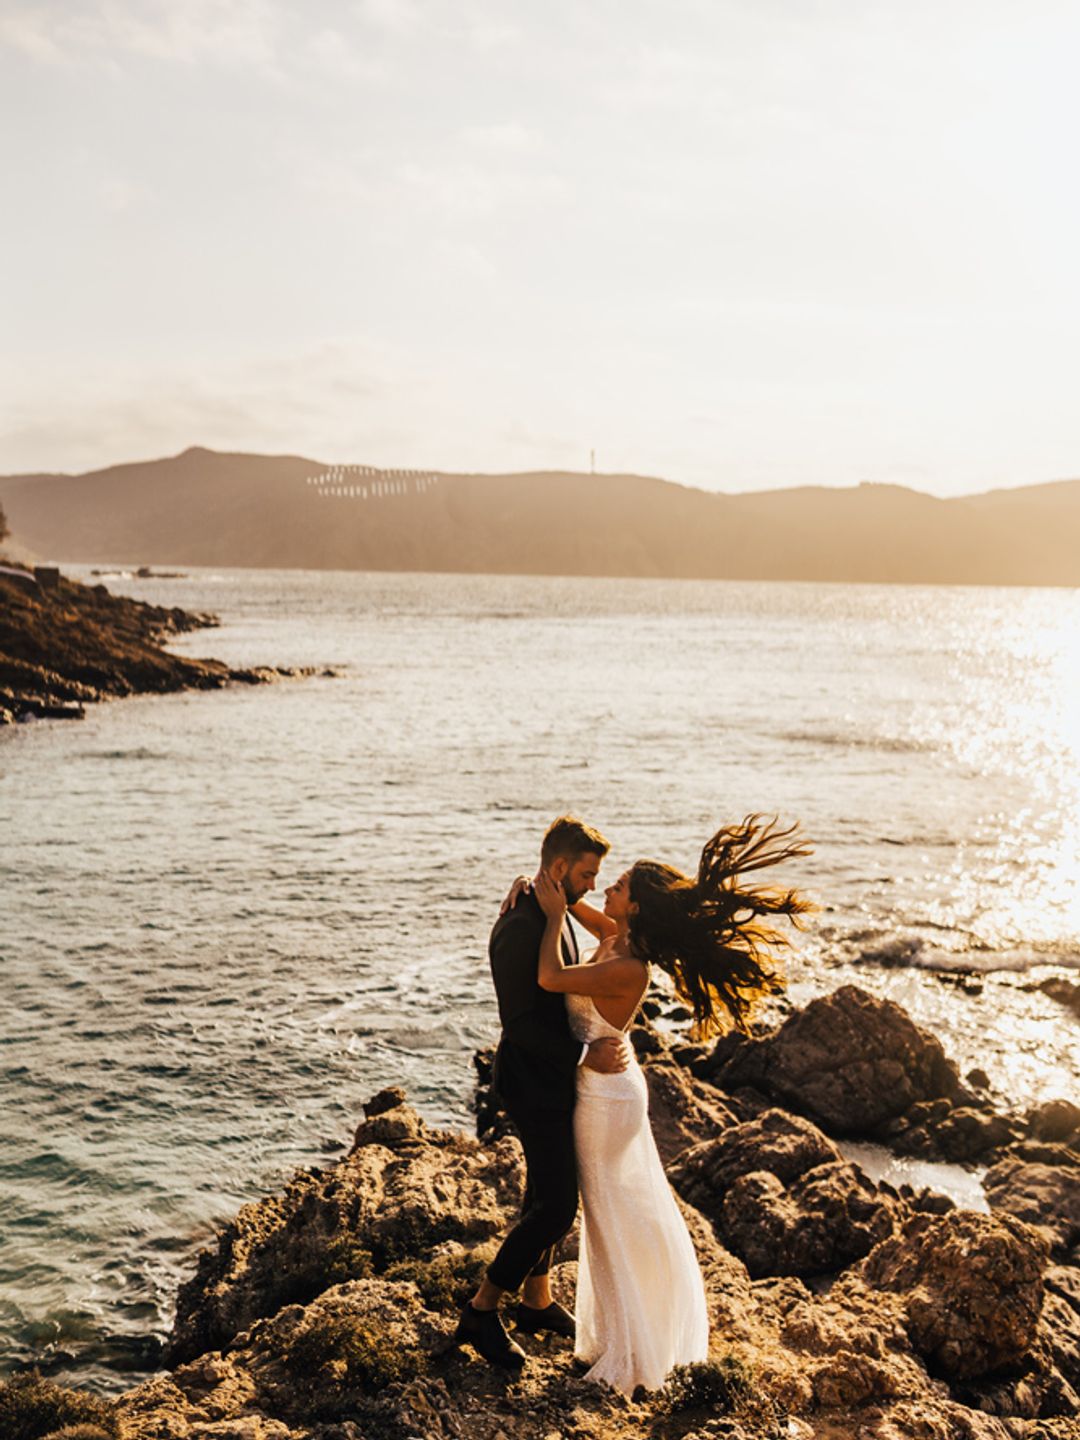 Bride and groom on the oceans edge